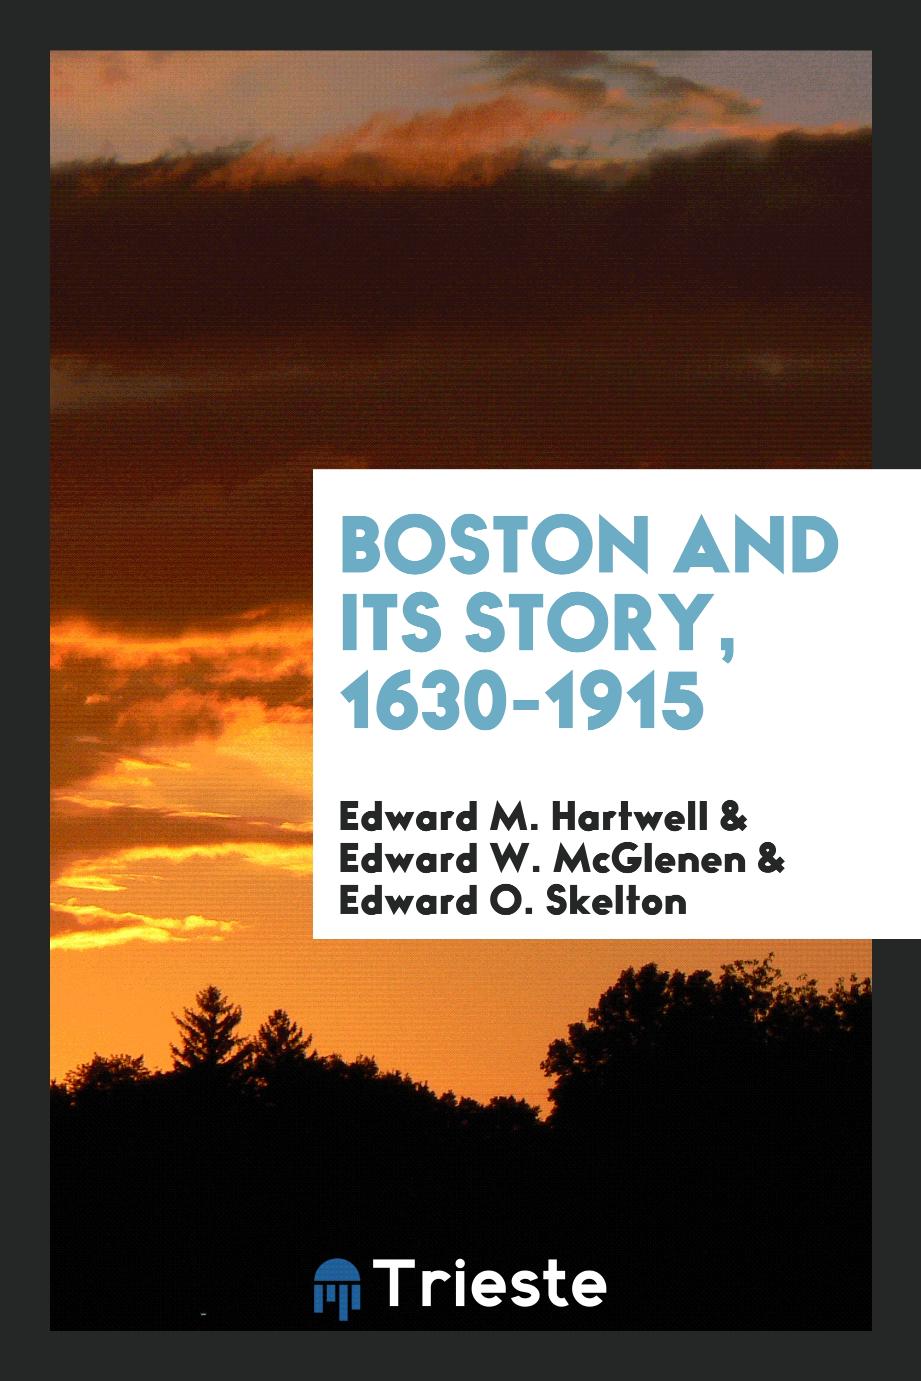 Boston and Its Story, 1630-1915